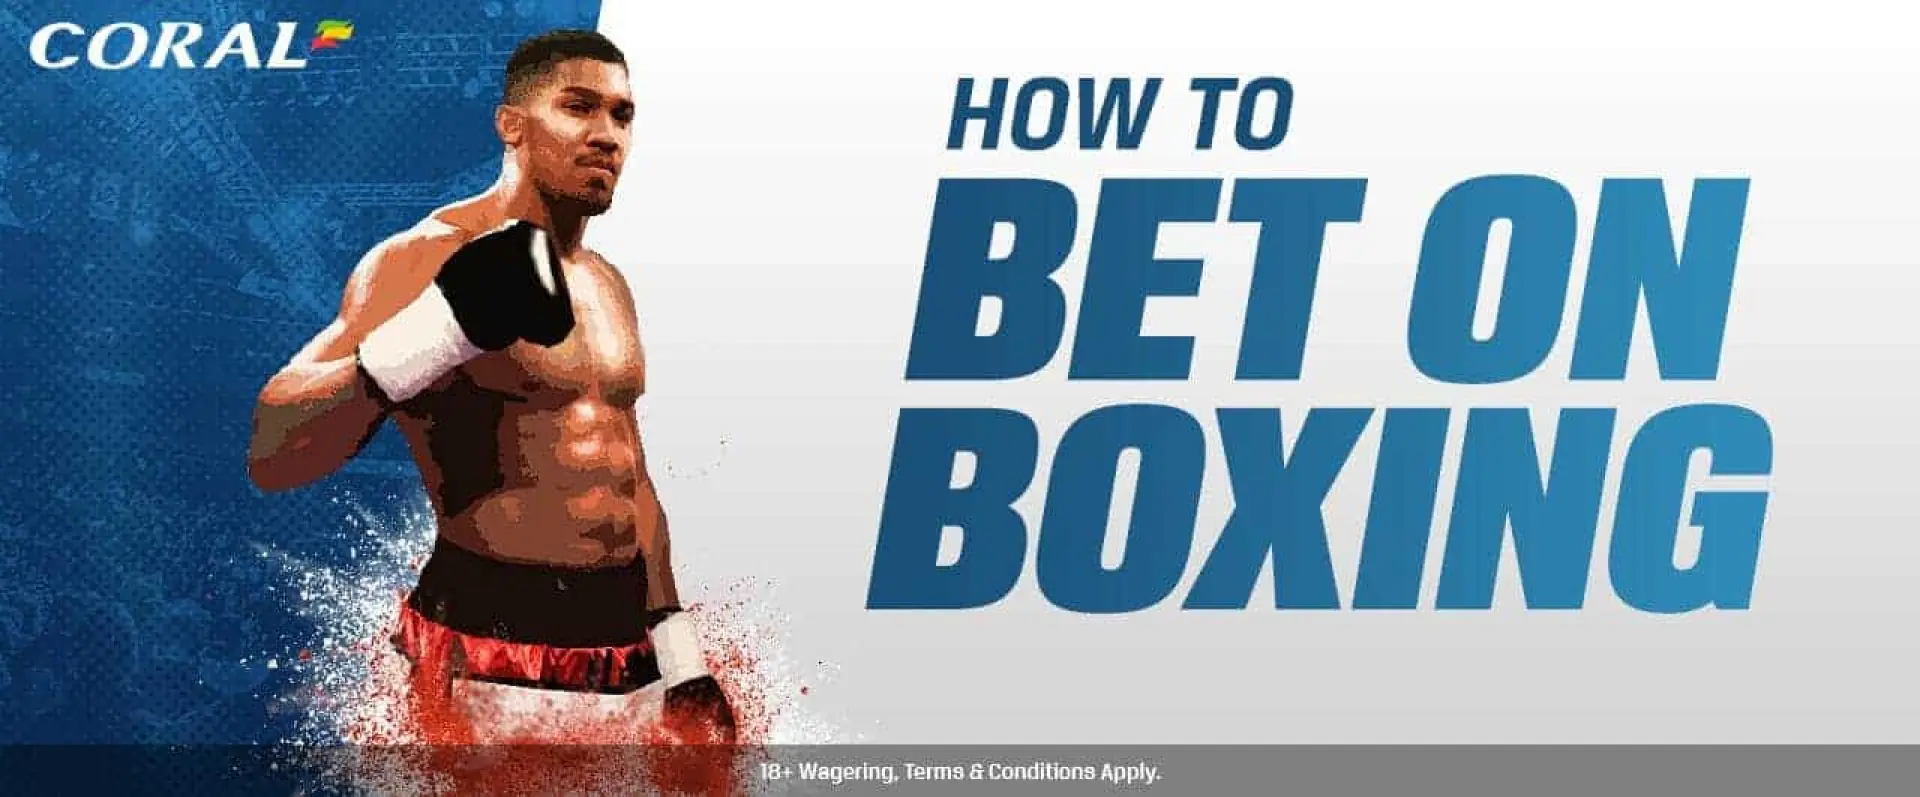 How to bet on Boxing Joshua